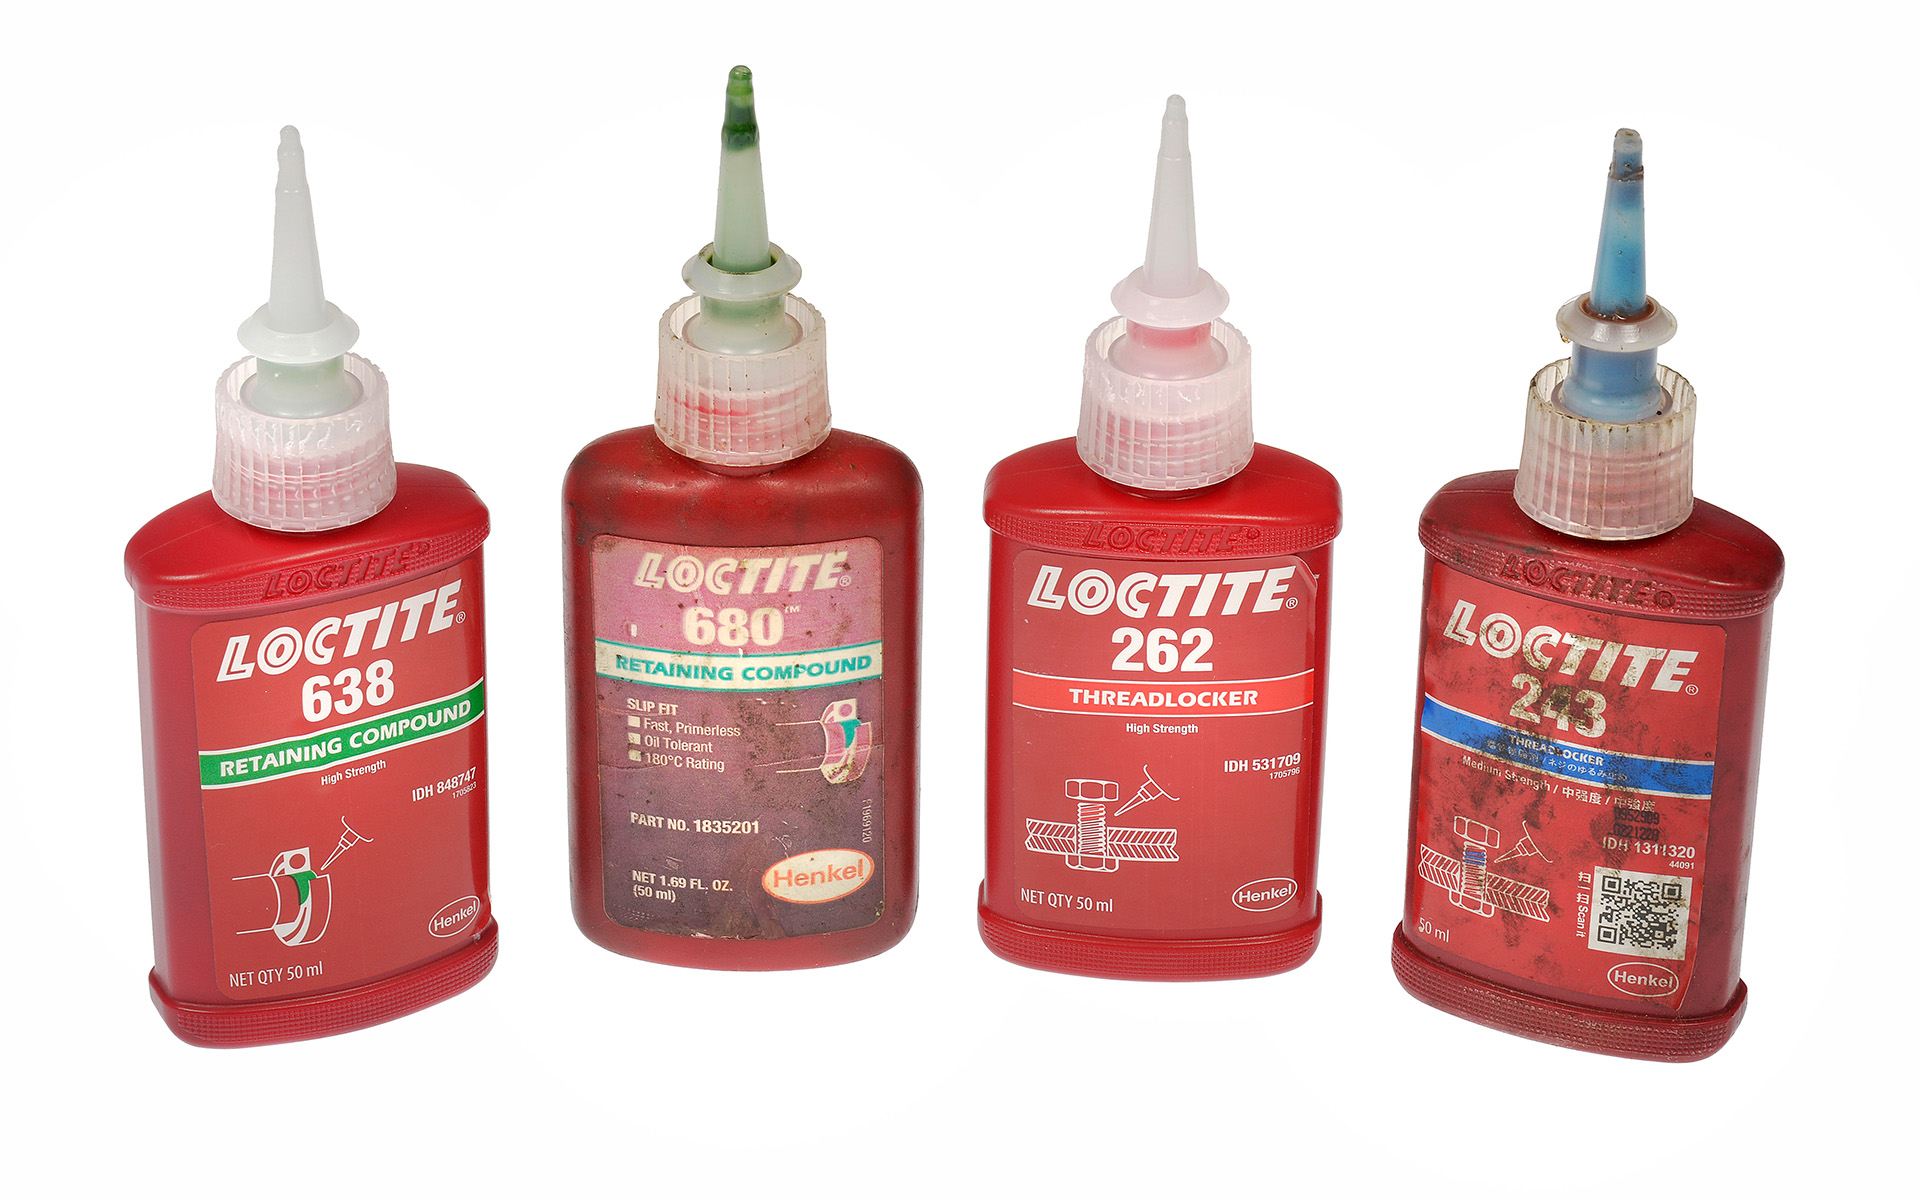 fake loctite products on a table